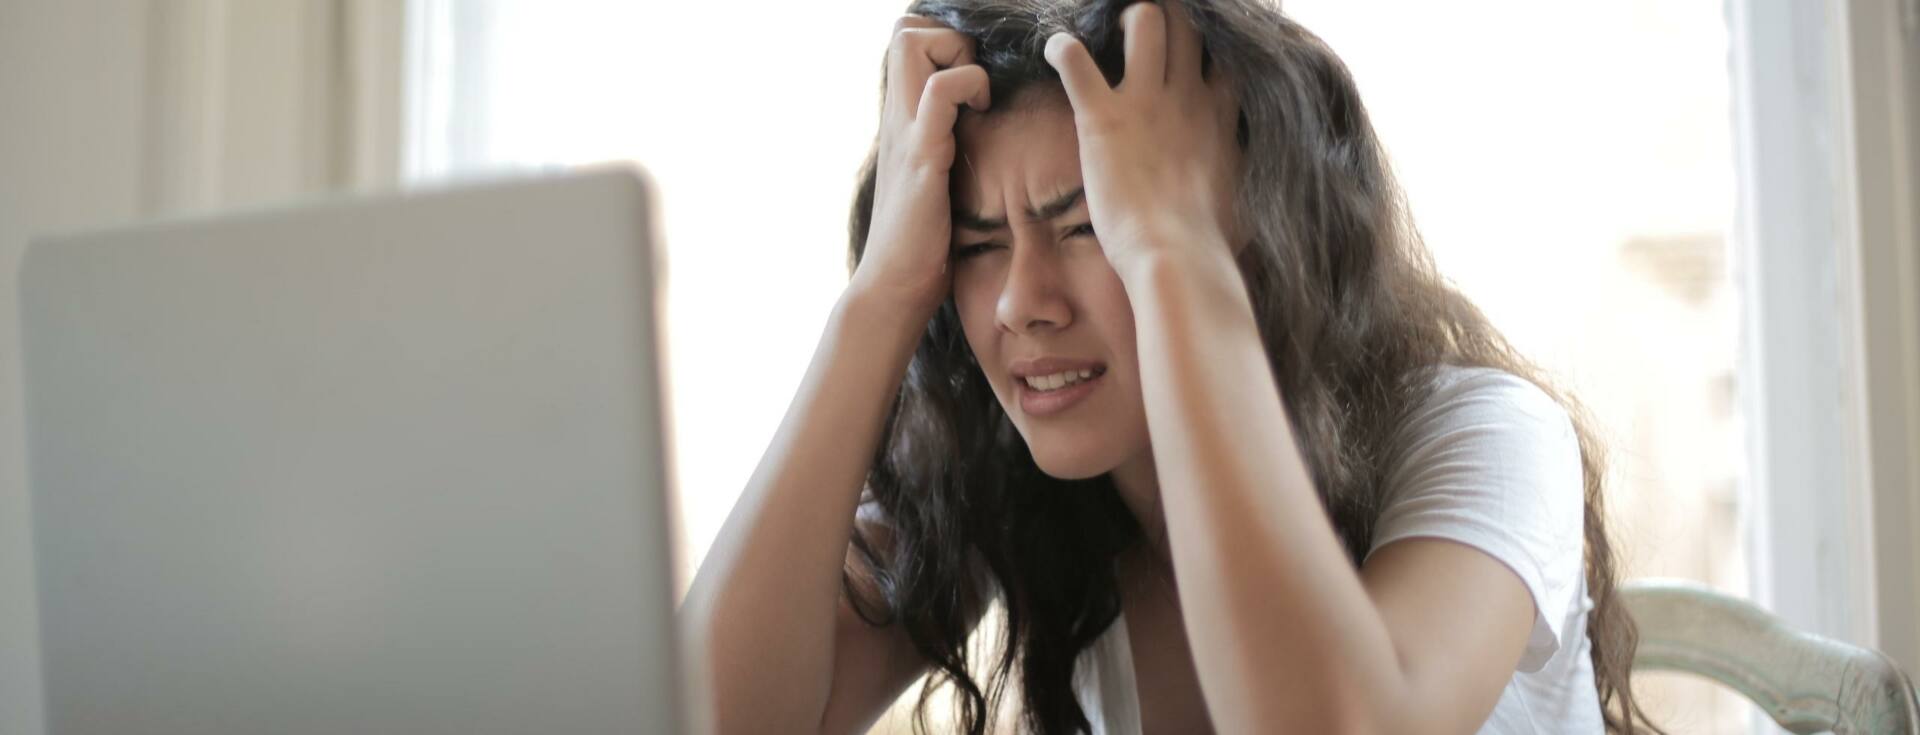 Frustrated woman looking at a computer and pulling hair